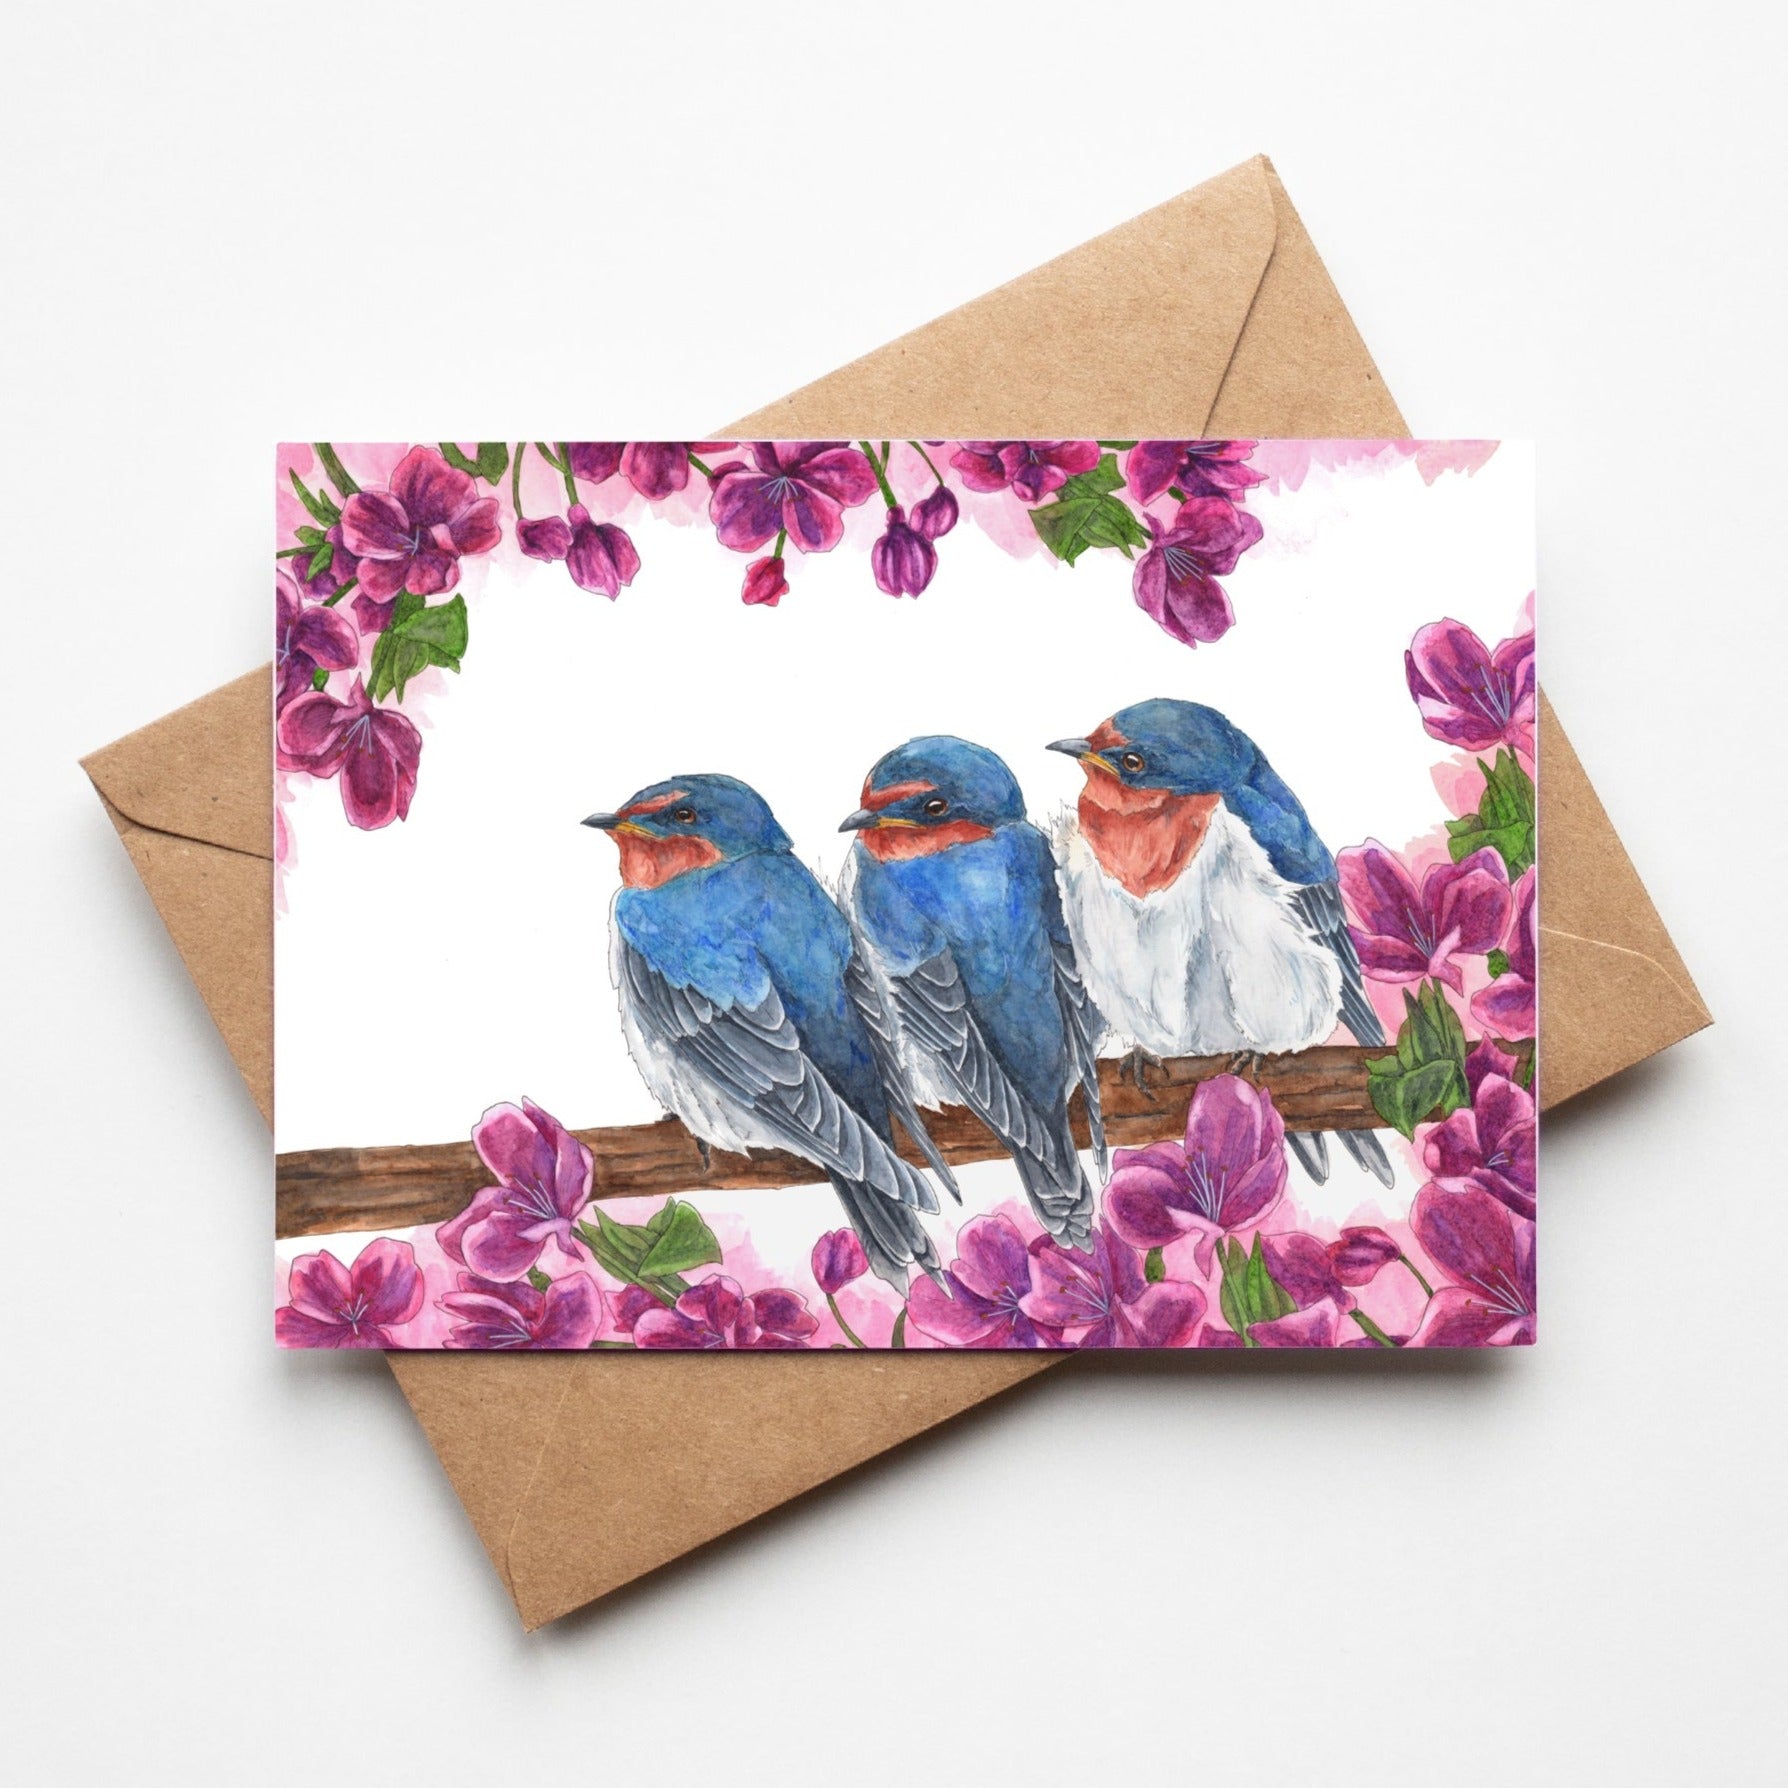 Greeting card by artist Leah Ingram featuring 3 Swallows on a branch surrounded by purple flowers.